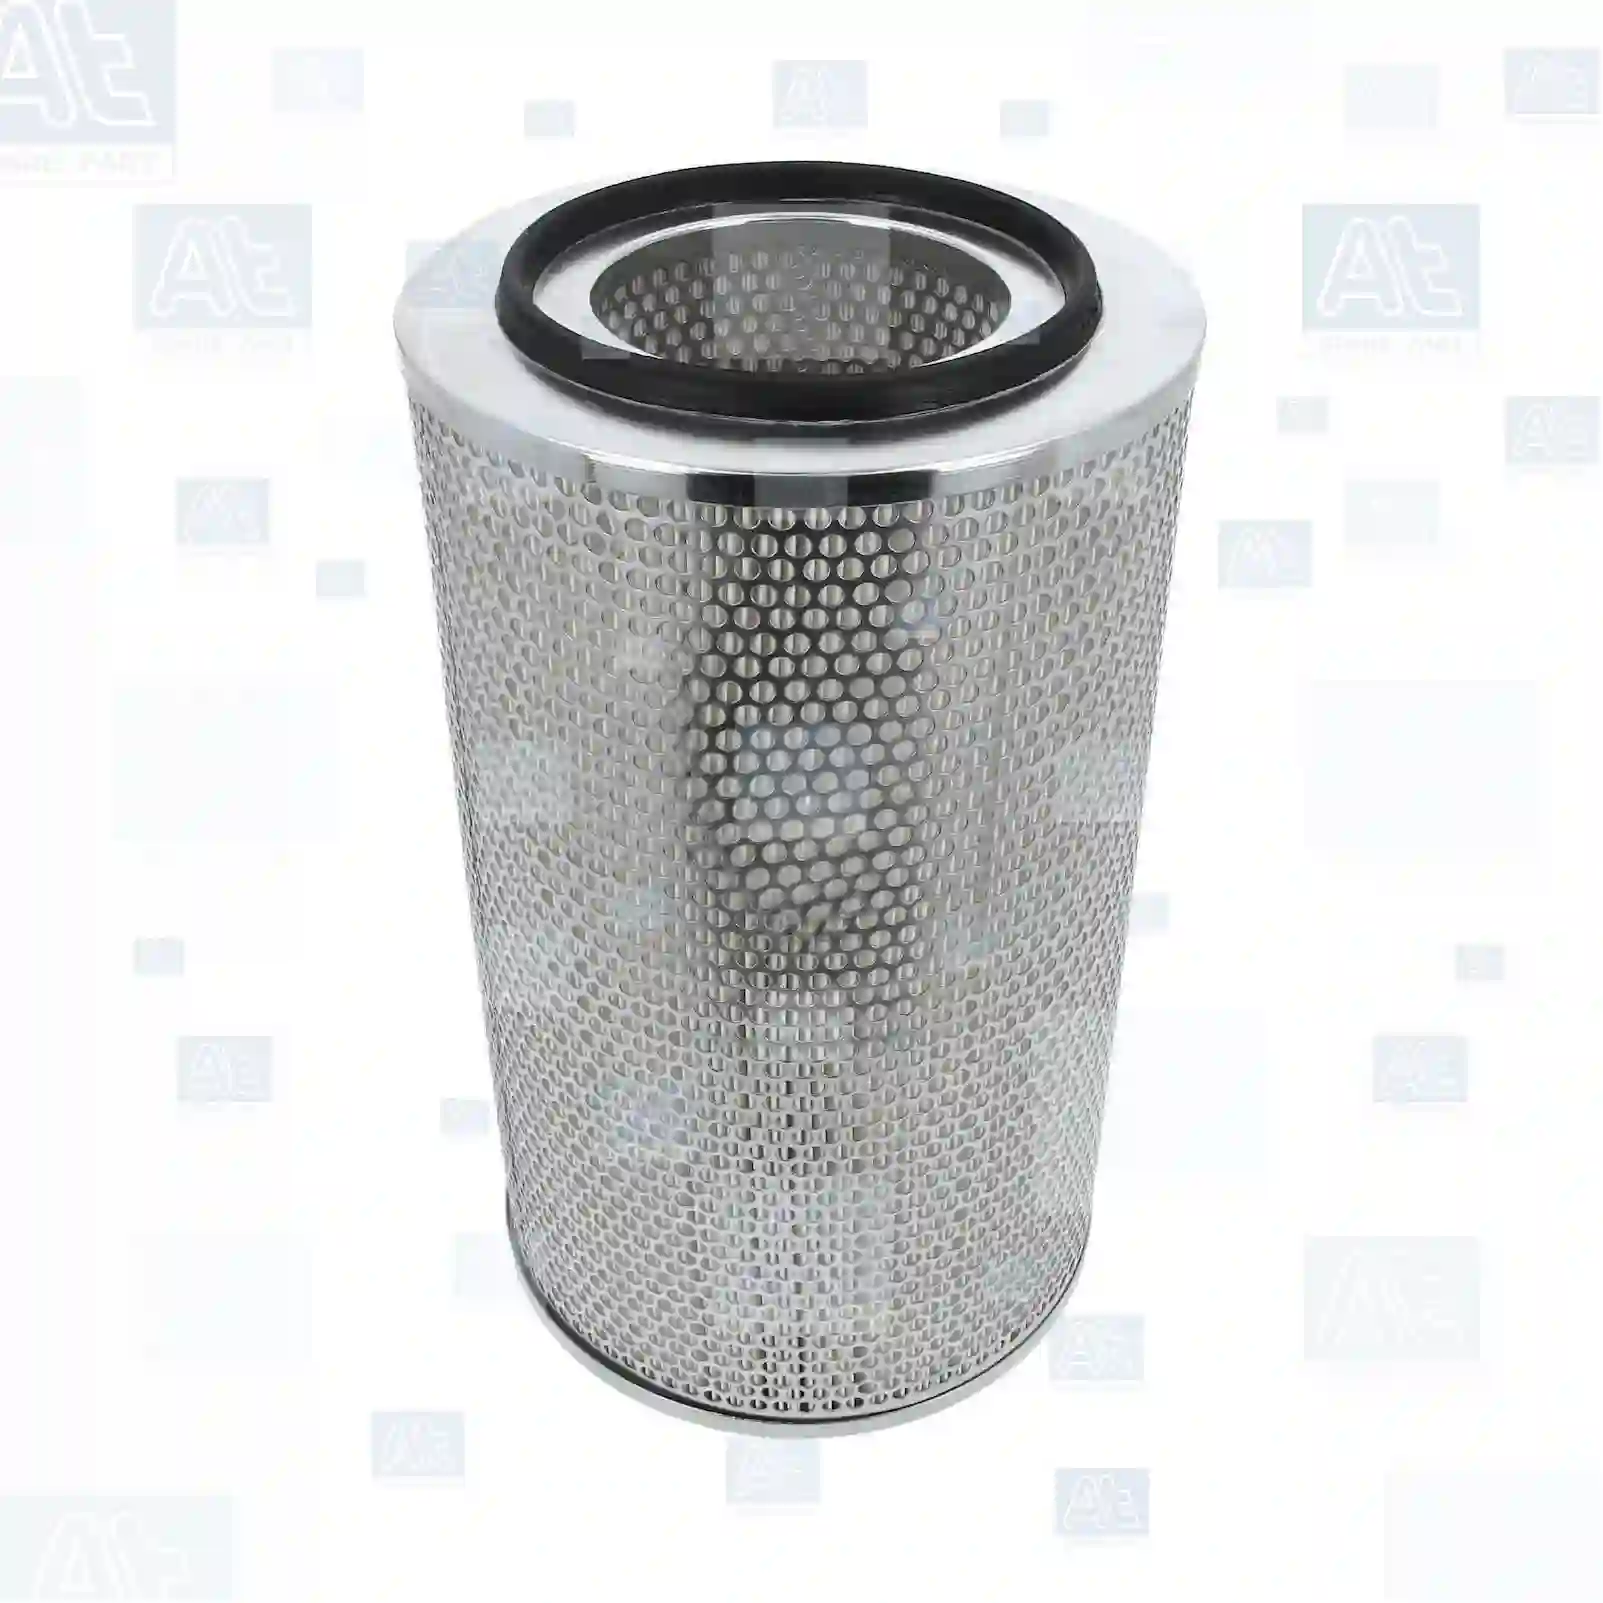 Air filter, at no 77706177, oem no: 2165054, 8009101128000, 3I-0835, 3I-0974, 10944704, 130941702, T0242503, T4212748, T4214314, T4214489, 0001770460, 0001770461, 0112294, 112094, 112294, 1500300, ABU8522, 00687774, 00746444, 074644, 0746444, 29504406, 432622, 43262200, 746444, 74644400, 988766, 98876600, 01902465, 02165041, 02165054, 02165074, 04002576, 09983763, 1210702033400, 8009101128000, 632114, 1318695, 1210702033400, 0746444, 1416433, 1470702, 4134406, 9746444, F385202090010, 00824847, 01186389, 01902046, 01902048, 01902465, 02165041, 02165054, 02165074, 07140555, 08323032, 08323285, 08323286, 08323287, 08323288, 09983763, 75248729, Y03727603, Y05776000, 5011325, 5011556, 5018033, 824847, 9974141, 25096250, 9974141, 2165054, 00632114, 01186389, 01902048, 01902465, 02165054, 02165074, 02165076, 08323032, 08323285, 08323286, 08323287, 08323288, 1186389, 1902048, 1902465, 2165054, 500024503, 75248729, 8323032, 8323285, 8323287, 8323288, AZ26091, 34000460, 02165054, 02165074, 09983763, 02165054, 5106188, 5106534, 5601964, 2191771508, 2191P771508, 04544054104, 04544055104, 04544092304, 04544092664, 81083040036, 81083040045, 81083040064, 82083040036, 85000015182, 85000015277, 0001094474, 0010944704, 0010947404, 0010948904, 0020946204, 0040940904, 0130941702, 3450847304, 3450947304, 020315400, 00824847, 80913927, 87682981, 16546-D9200, 632114, 99000190075, 99000190702, 99012190701, 0002214489, 0003563595, 0004212748, 0004214189, 0004214314, 0004214489, 0022004800, 0500242503, 5000242503, 5000283088, 5000286773, 5000783932, 5001834750, 5010094144, 6005019662, 7485129567, R9601, ABU8522, 4631072000, 4631072020, 235586, 8315085102, 8319085102, 99000190075, 99000190702, 99012190701, 5501660684, 16546D9200, 805044, 80504400, 80504410, 601200960, 631204401, 12705260, CH12242, 6644990, 66449901, 6644991, 664990, 79359626, T15129620, ZG00825-0008 At Spare Part | Engine, Accelerator Pedal, Camshaft, Connecting Rod, Crankcase, Crankshaft, Cylinder Head, Engine Suspension Mountings, Exhaust Manifold, Exhaust Gas Recirculation, Filter Kits, Flywheel Housing, General Overhaul Kits, Engine, Intake Manifold, Oil Cleaner, Oil Cooler, Oil Filter, Oil Pump, Oil Sump, Piston & Liner, Sensor & Switch, Timing Case, Turbocharger, Cooling System, Belt Tensioner, Coolant Filter, Coolant Pipe, Corrosion Prevention Agent, Drive, Expansion Tank, Fan, Intercooler, Monitors & Gauges, Radiator, Thermostat, V-Belt / Timing belt, Water Pump, Fuel System, Electronical Injector Unit, Feed Pump, Fuel Filter, cpl., Fuel Gauge Sender,  Fuel Line, Fuel Pump, Fuel Tank, Injection Line Kit, Injection Pump, Exhaust System, Clutch & Pedal, Gearbox, Propeller Shaft, Axles, Brake System, Hubs & Wheels, Suspension, Leaf Spring, Universal Parts / Accessories, Steering, Electrical System, Cabin Air filter, at no 77706177, oem no: 2165054, 8009101128000, 3I-0835, 3I-0974, 10944704, 130941702, T0242503, T4212748, T4214314, T4214489, 0001770460, 0001770461, 0112294, 112094, 112294, 1500300, ABU8522, 00687774, 00746444, 074644, 0746444, 29504406, 432622, 43262200, 746444, 74644400, 988766, 98876600, 01902465, 02165041, 02165054, 02165074, 04002576, 09983763, 1210702033400, 8009101128000, 632114, 1318695, 1210702033400, 0746444, 1416433, 1470702, 4134406, 9746444, F385202090010, 00824847, 01186389, 01902046, 01902048, 01902465, 02165041, 02165054, 02165074, 07140555, 08323032, 08323285, 08323286, 08323287, 08323288, 09983763, 75248729, Y03727603, Y05776000, 5011325, 5011556, 5018033, 824847, 9974141, 25096250, 9974141, 2165054, 00632114, 01186389, 01902048, 01902465, 02165054, 02165074, 02165076, 08323032, 08323285, 08323286, 08323287, 08323288, 1186389, 1902048, 1902465, 2165054, 500024503, 75248729, 8323032, 8323285, 8323287, 8323288, AZ26091, 34000460, 02165054, 02165074, 09983763, 02165054, 5106188, 5106534, 5601964, 2191771508, 2191P771508, 04544054104, 04544055104, 04544092304, 04544092664, 81083040036, 81083040045, 81083040064, 82083040036, 85000015182, 85000015277, 0001094474, 0010944704, 0010947404, 0010948904, 0020946204, 0040940904, 0130941702, 3450847304, 3450947304, 020315400, 00824847, 80913927, 87682981, 16546-D9200, 632114, 99000190075, 99000190702, 99012190701, 0002214489, 0003563595, 0004212748, 0004214189, 0004214314, 0004214489, 0022004800, 0500242503, 5000242503, 5000283088, 5000286773, 5000783932, 5001834750, 5010094144, 6005019662, 7485129567, R9601, ABU8522, 4631072000, 4631072020, 235586, 8315085102, 8319085102, 99000190075, 99000190702, 99012190701, 5501660684, 16546D9200, 805044, 80504400, 80504410, 601200960, 631204401, 12705260, CH12242, 6644990, 66449901, 6644991, 664990, 79359626, T15129620, ZG00825-0008 At Spare Part | Engine, Accelerator Pedal, Camshaft, Connecting Rod, Crankcase, Crankshaft, Cylinder Head, Engine Suspension Mountings, Exhaust Manifold, Exhaust Gas Recirculation, Filter Kits, Flywheel Housing, General Overhaul Kits, Engine, Intake Manifold, Oil Cleaner, Oil Cooler, Oil Filter, Oil Pump, Oil Sump, Piston & Liner, Sensor & Switch, Timing Case, Turbocharger, Cooling System, Belt Tensioner, Coolant Filter, Coolant Pipe, Corrosion Prevention Agent, Drive, Expansion Tank, Fan, Intercooler, Monitors & Gauges, Radiator, Thermostat, V-Belt / Timing belt, Water Pump, Fuel System, Electronical Injector Unit, Feed Pump, Fuel Filter, cpl., Fuel Gauge Sender,  Fuel Line, Fuel Pump, Fuel Tank, Injection Line Kit, Injection Pump, Exhaust System, Clutch & Pedal, Gearbox, Propeller Shaft, Axles, Brake System, Hubs & Wheels, Suspension, Leaf Spring, Universal Parts / Accessories, Steering, Electrical System, Cabin